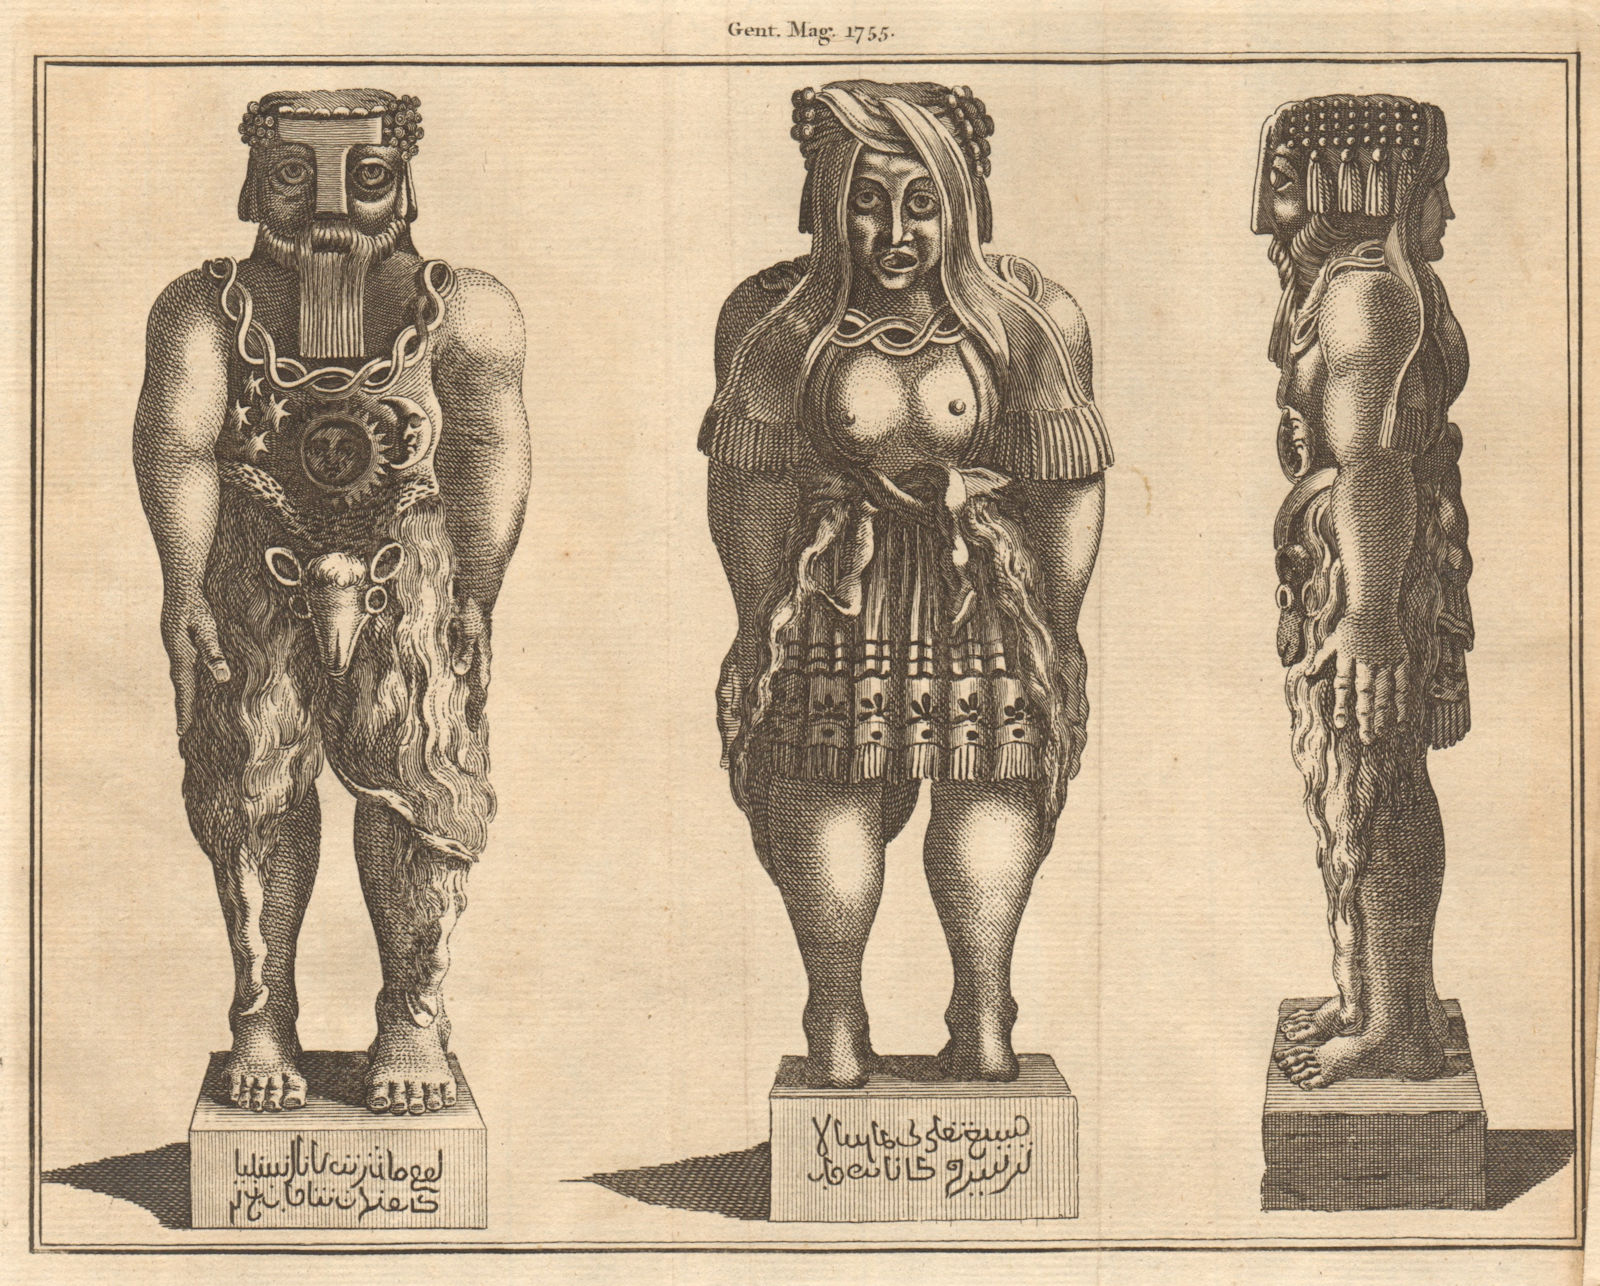 Associate Product Two faced man/woman statue, found in Smyrna/Izmir. Turkey 1755 old print